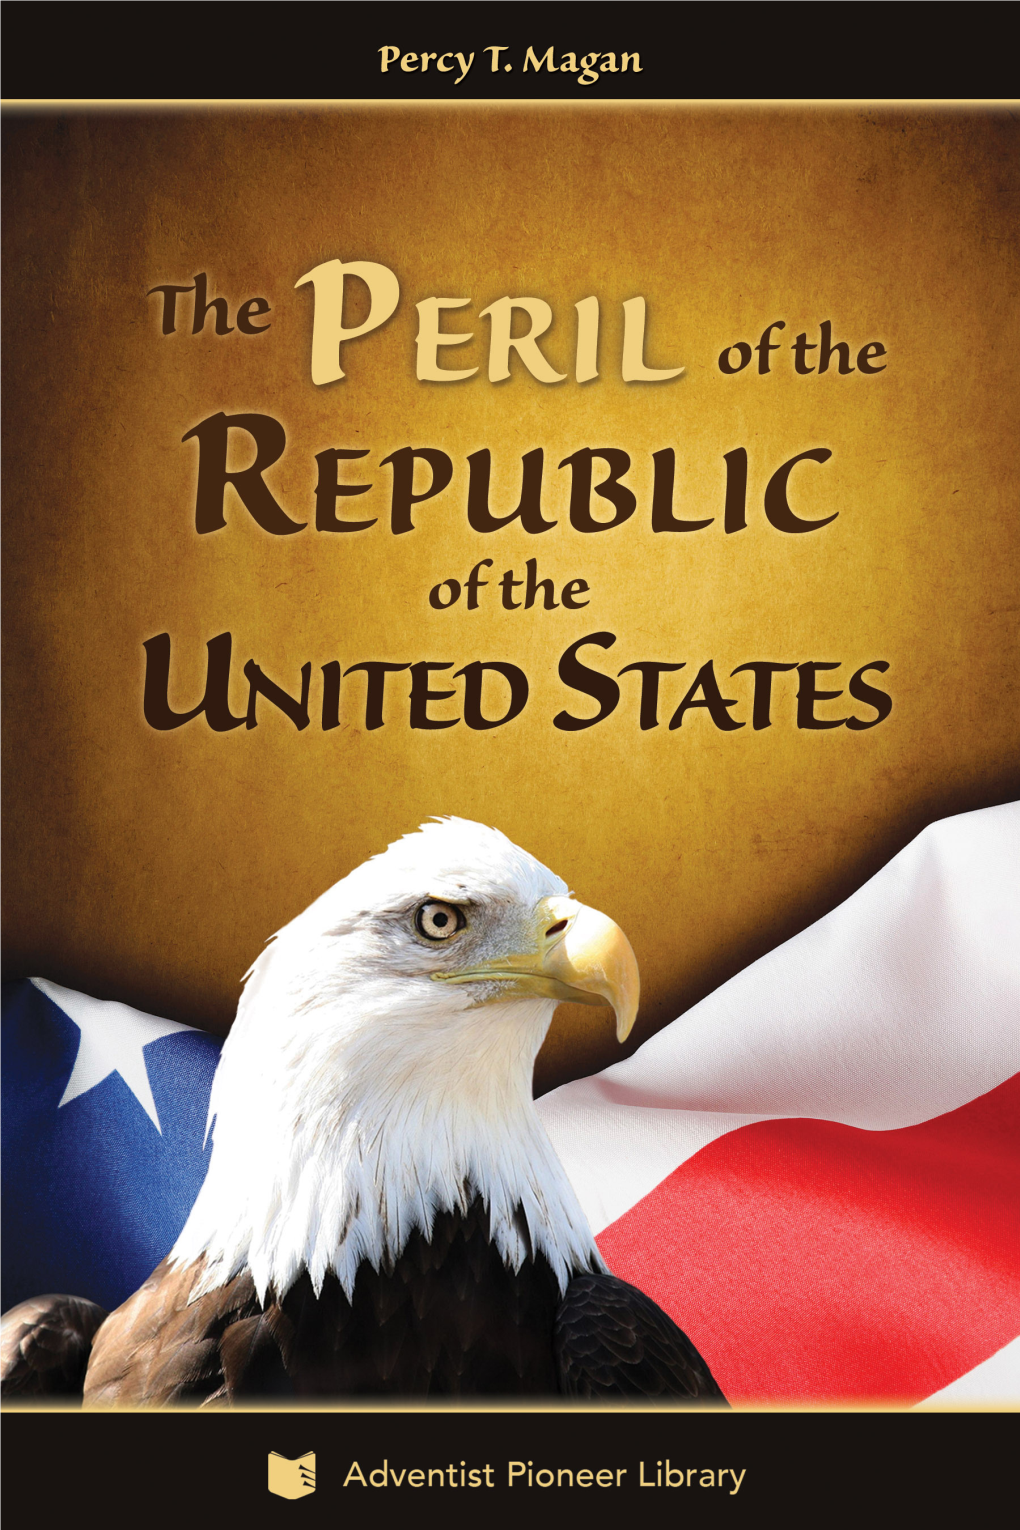 The Peril of the Republic of the United States of America